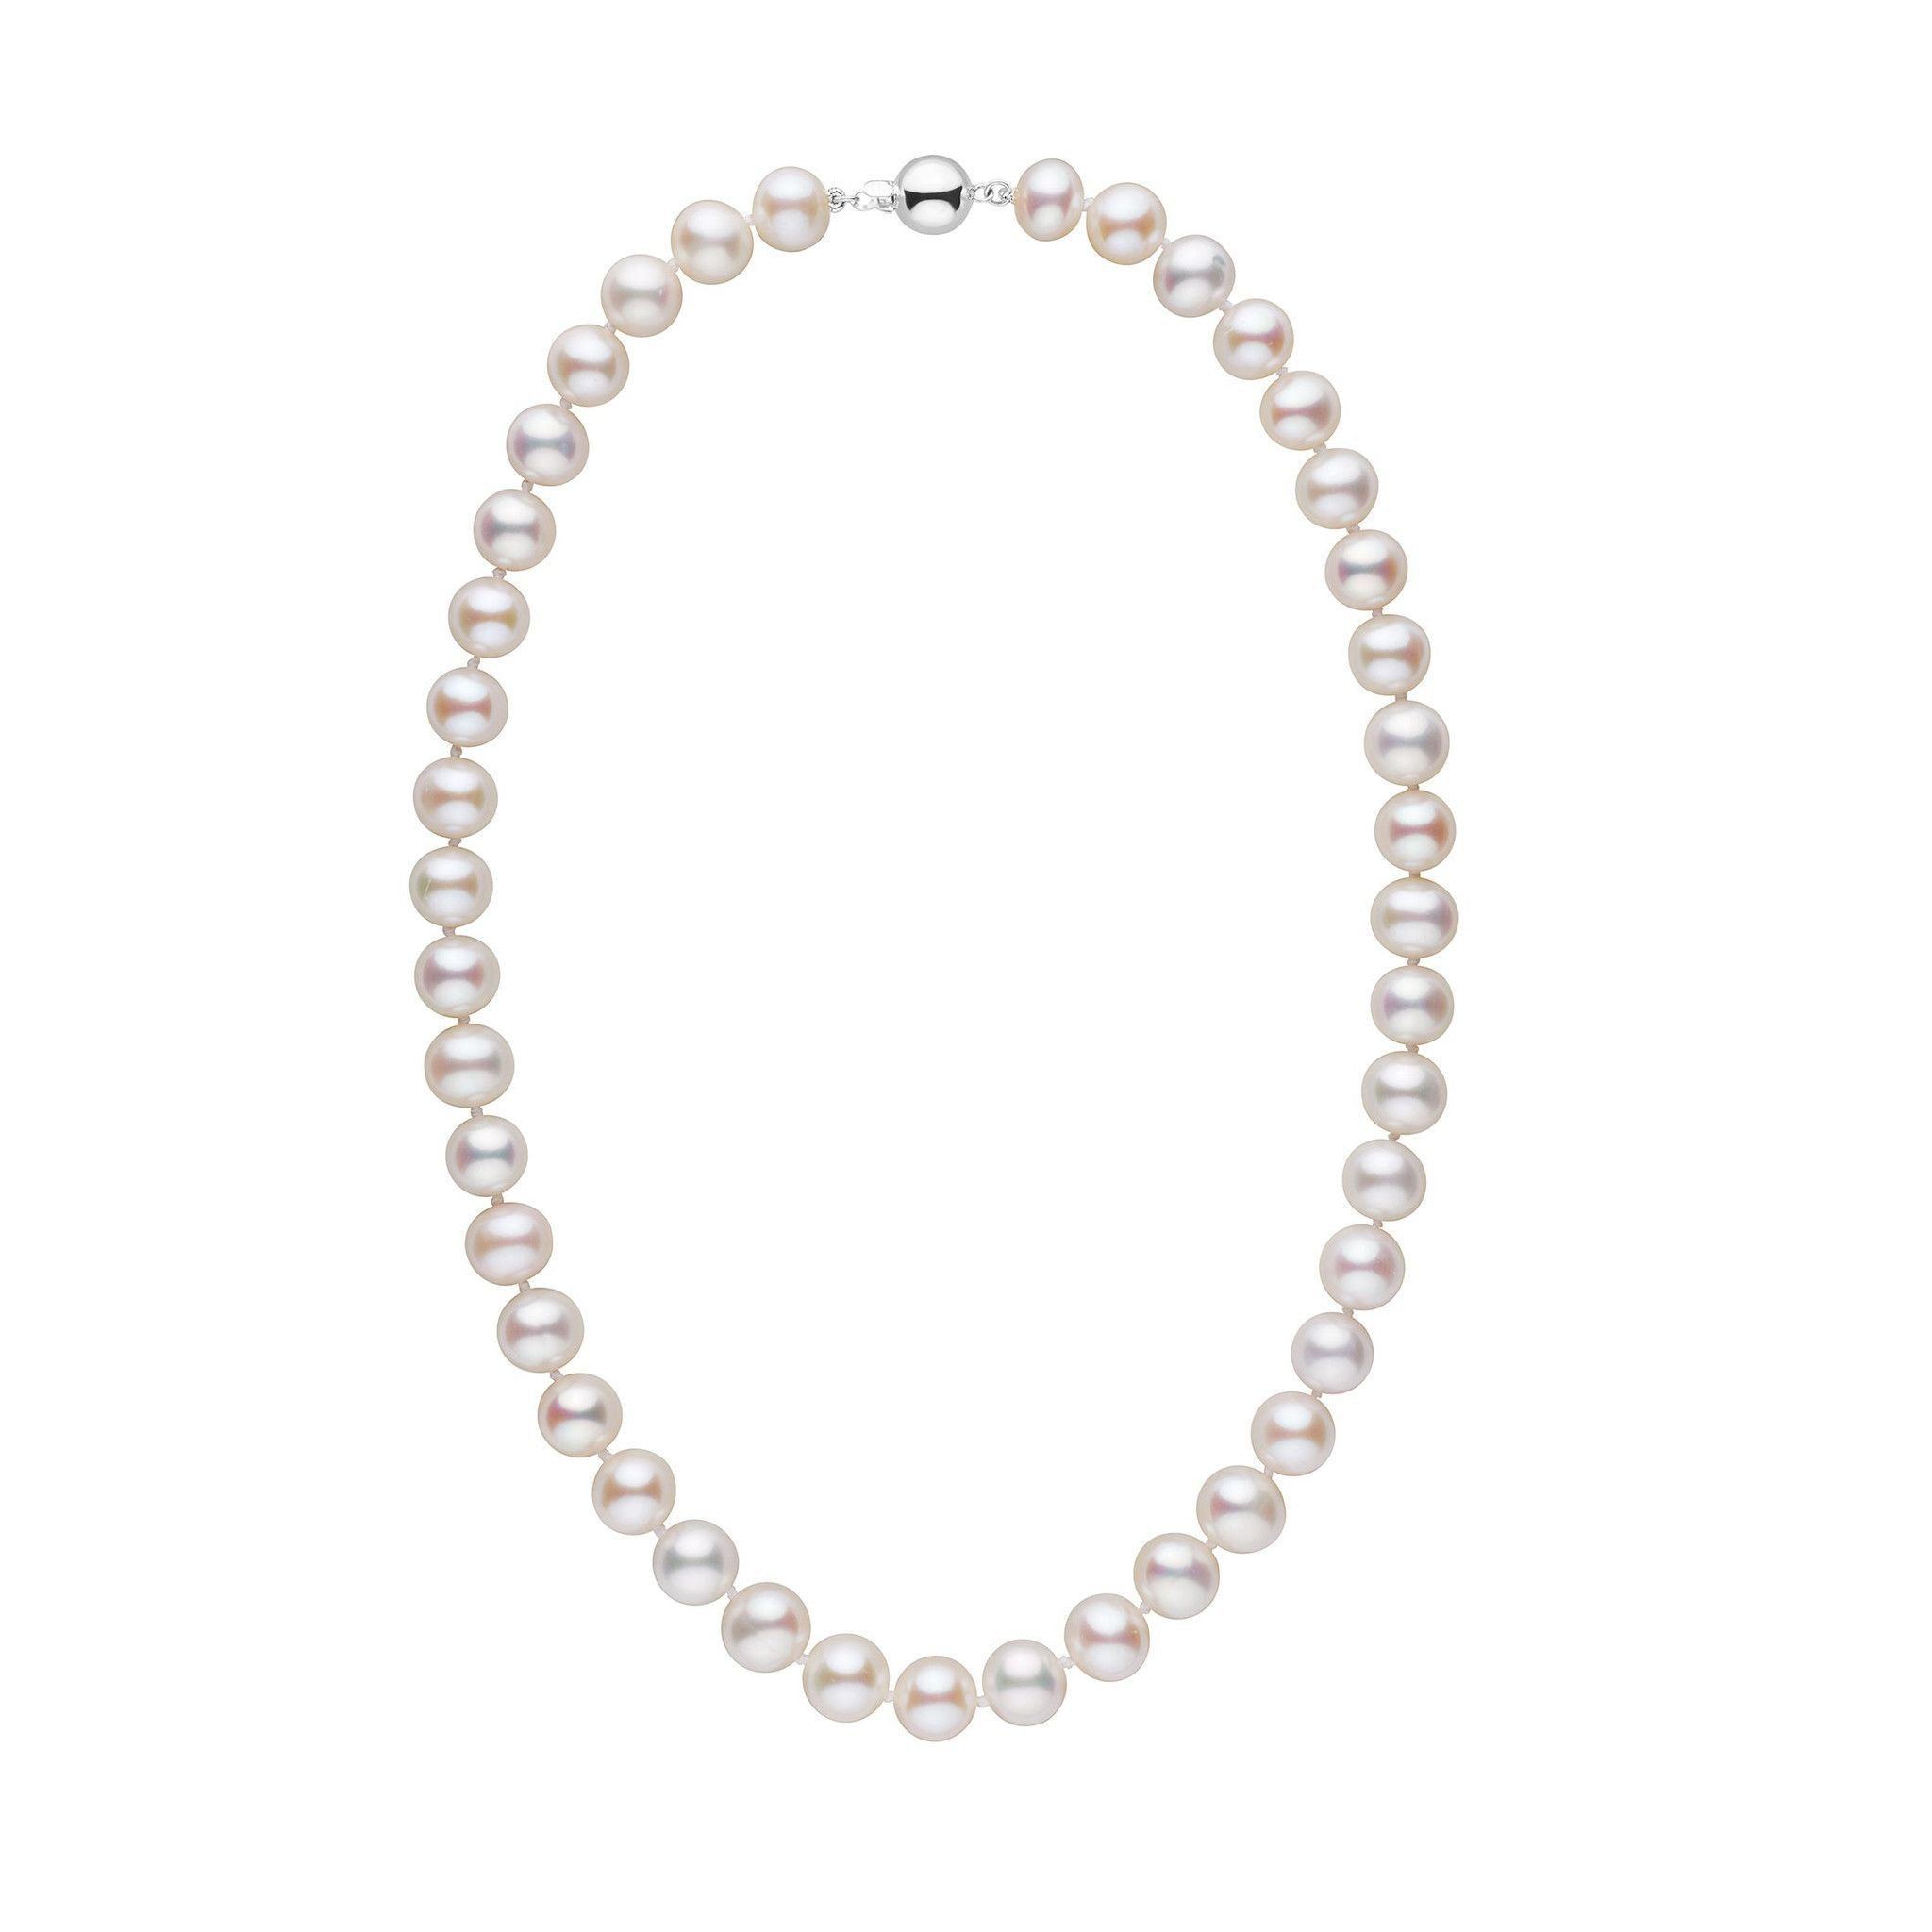 9.5-10.5 mm 18 inch AA+ White Freshwater Pearl Necklace